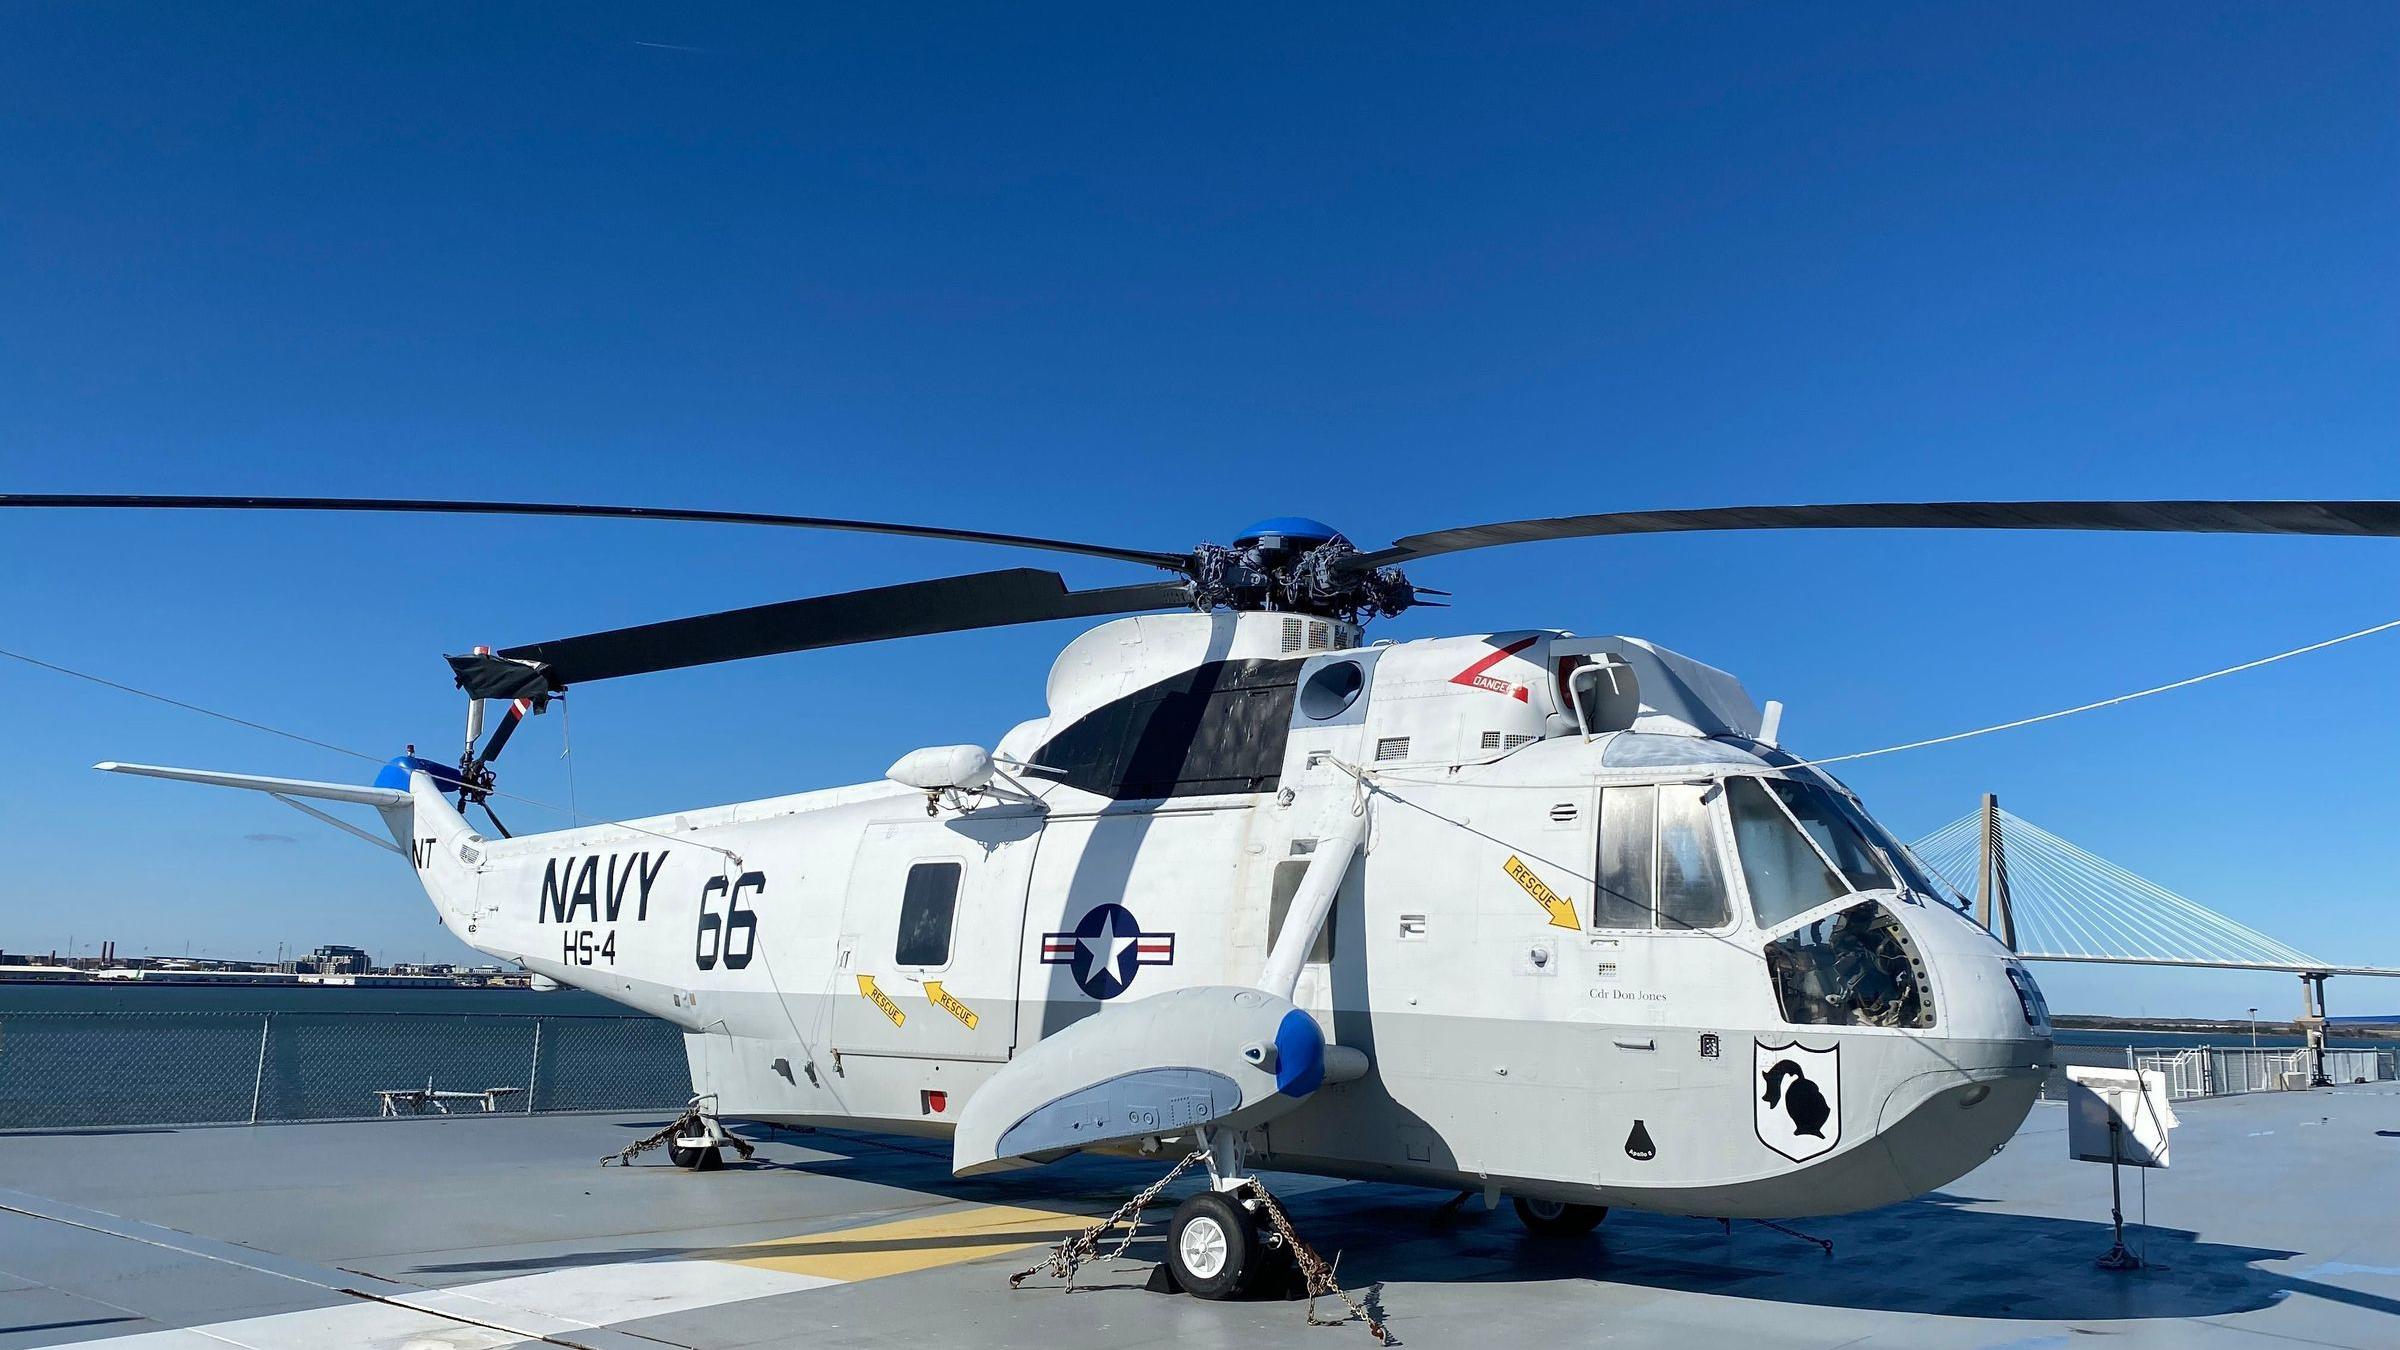 Primary Image of SH-3G Sea King